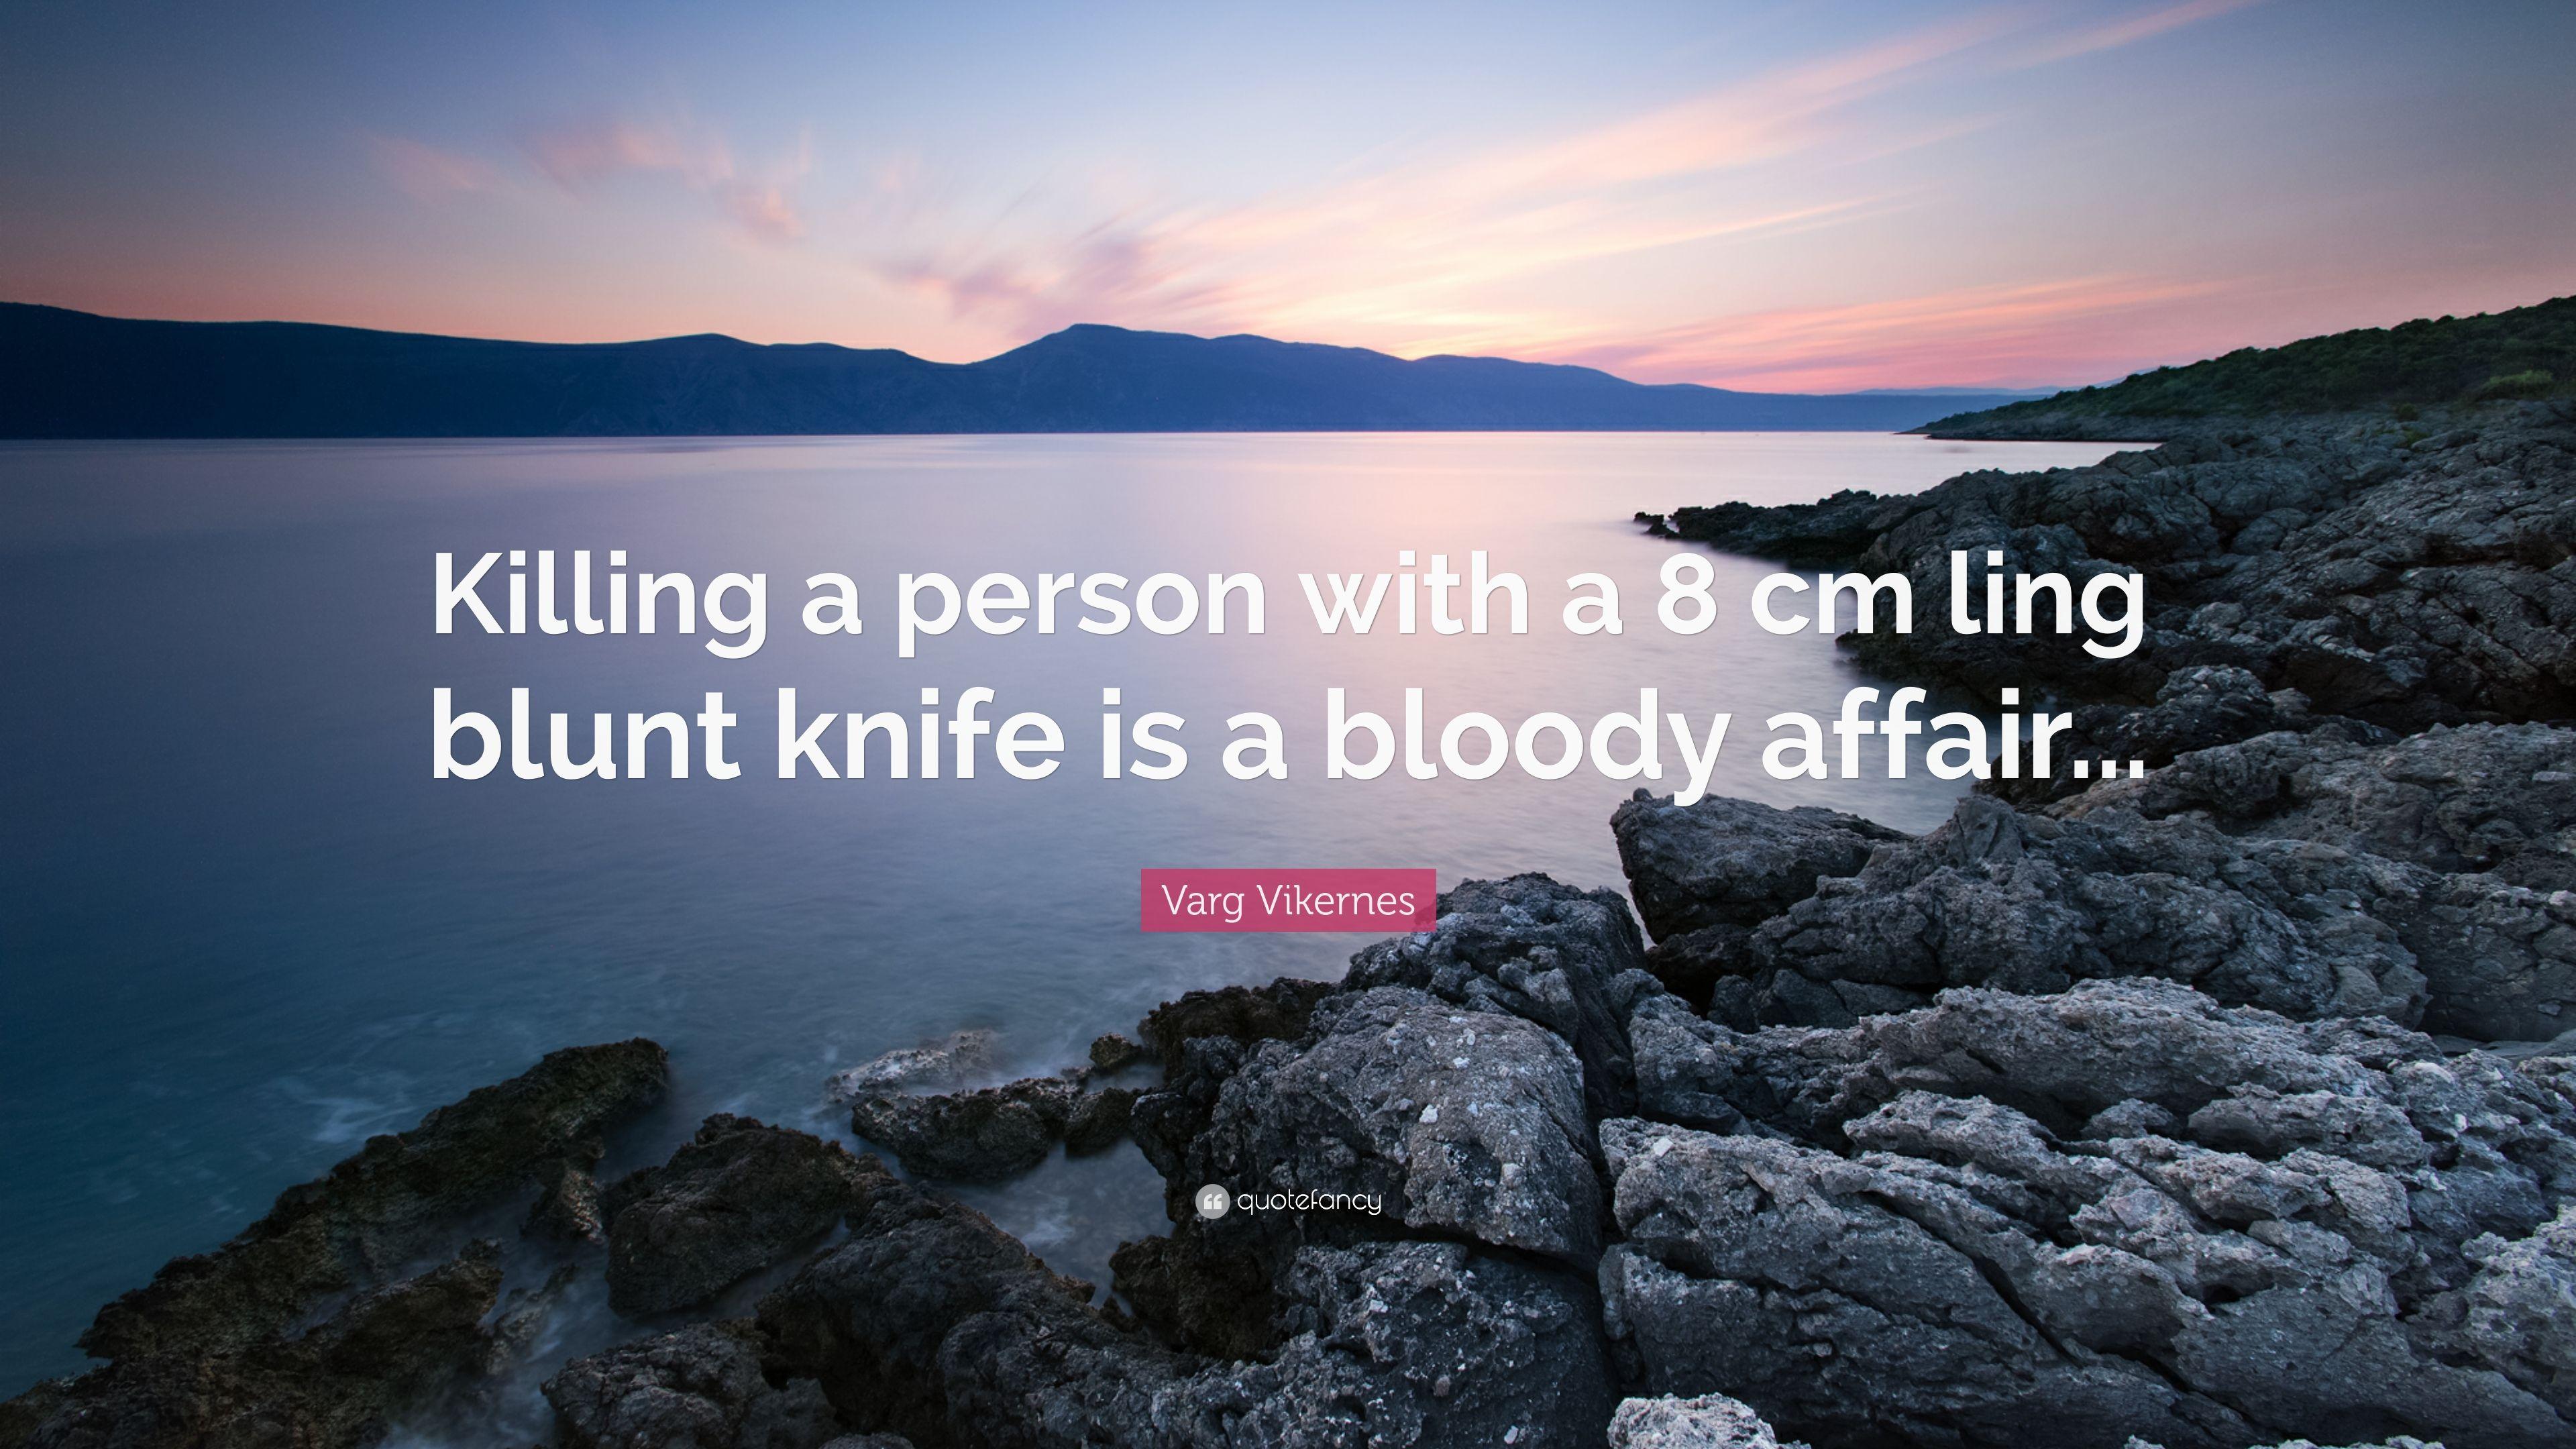 Varg Vikernes Quote: “Killing a person with a 8 cm ling blunt knife